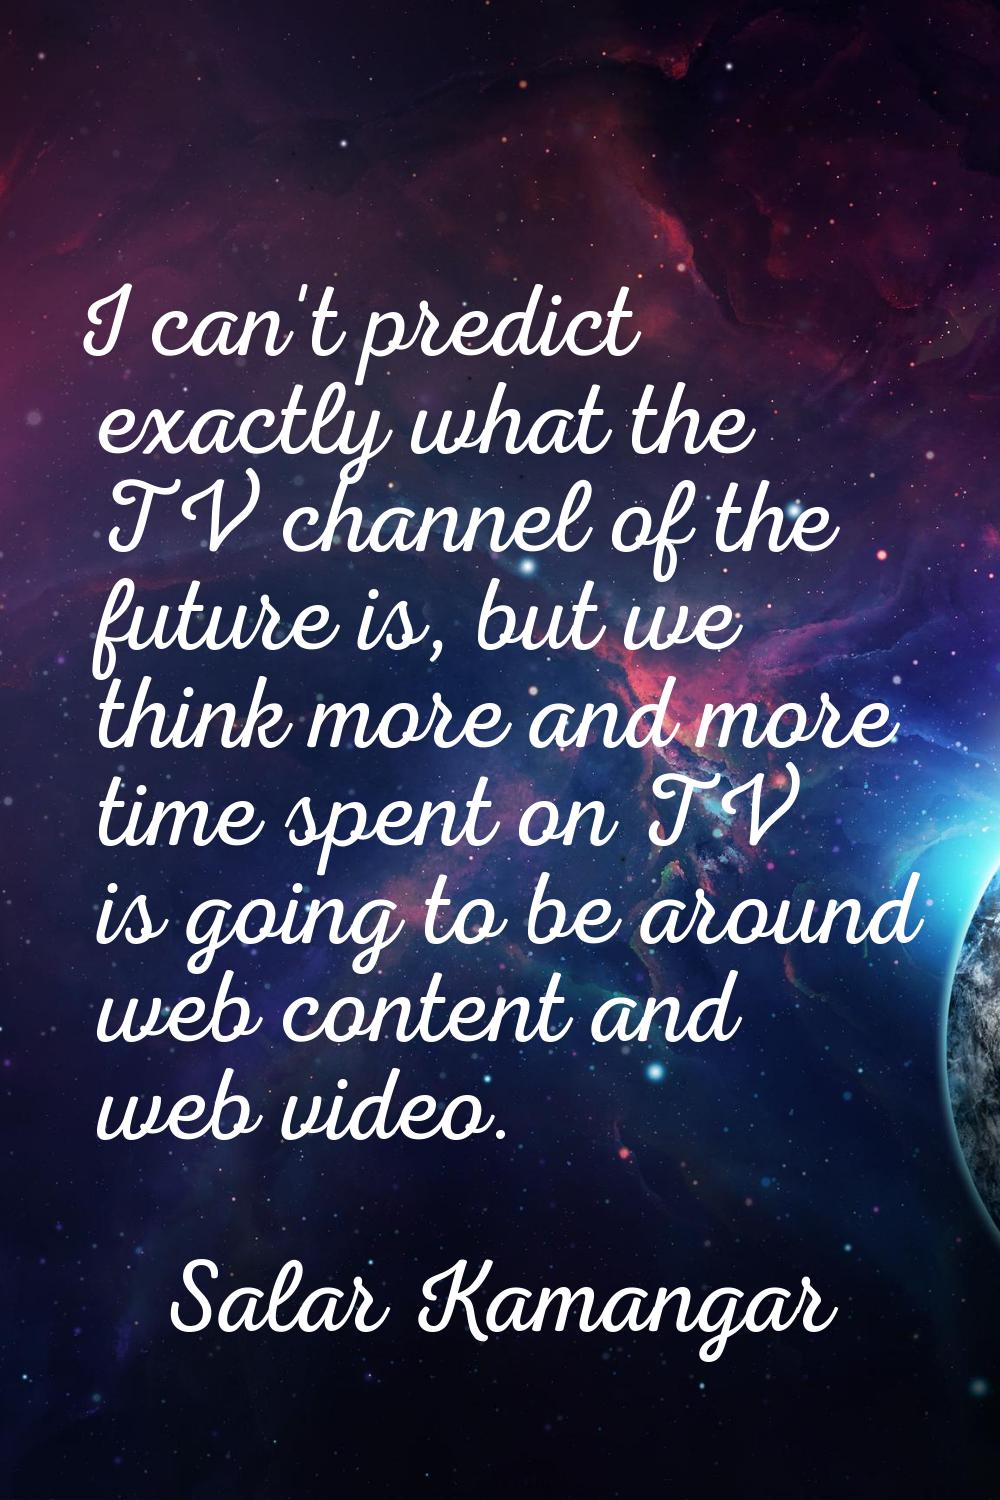 I can't predict exactly what the TV channel of the future is, but we think more and more time spent